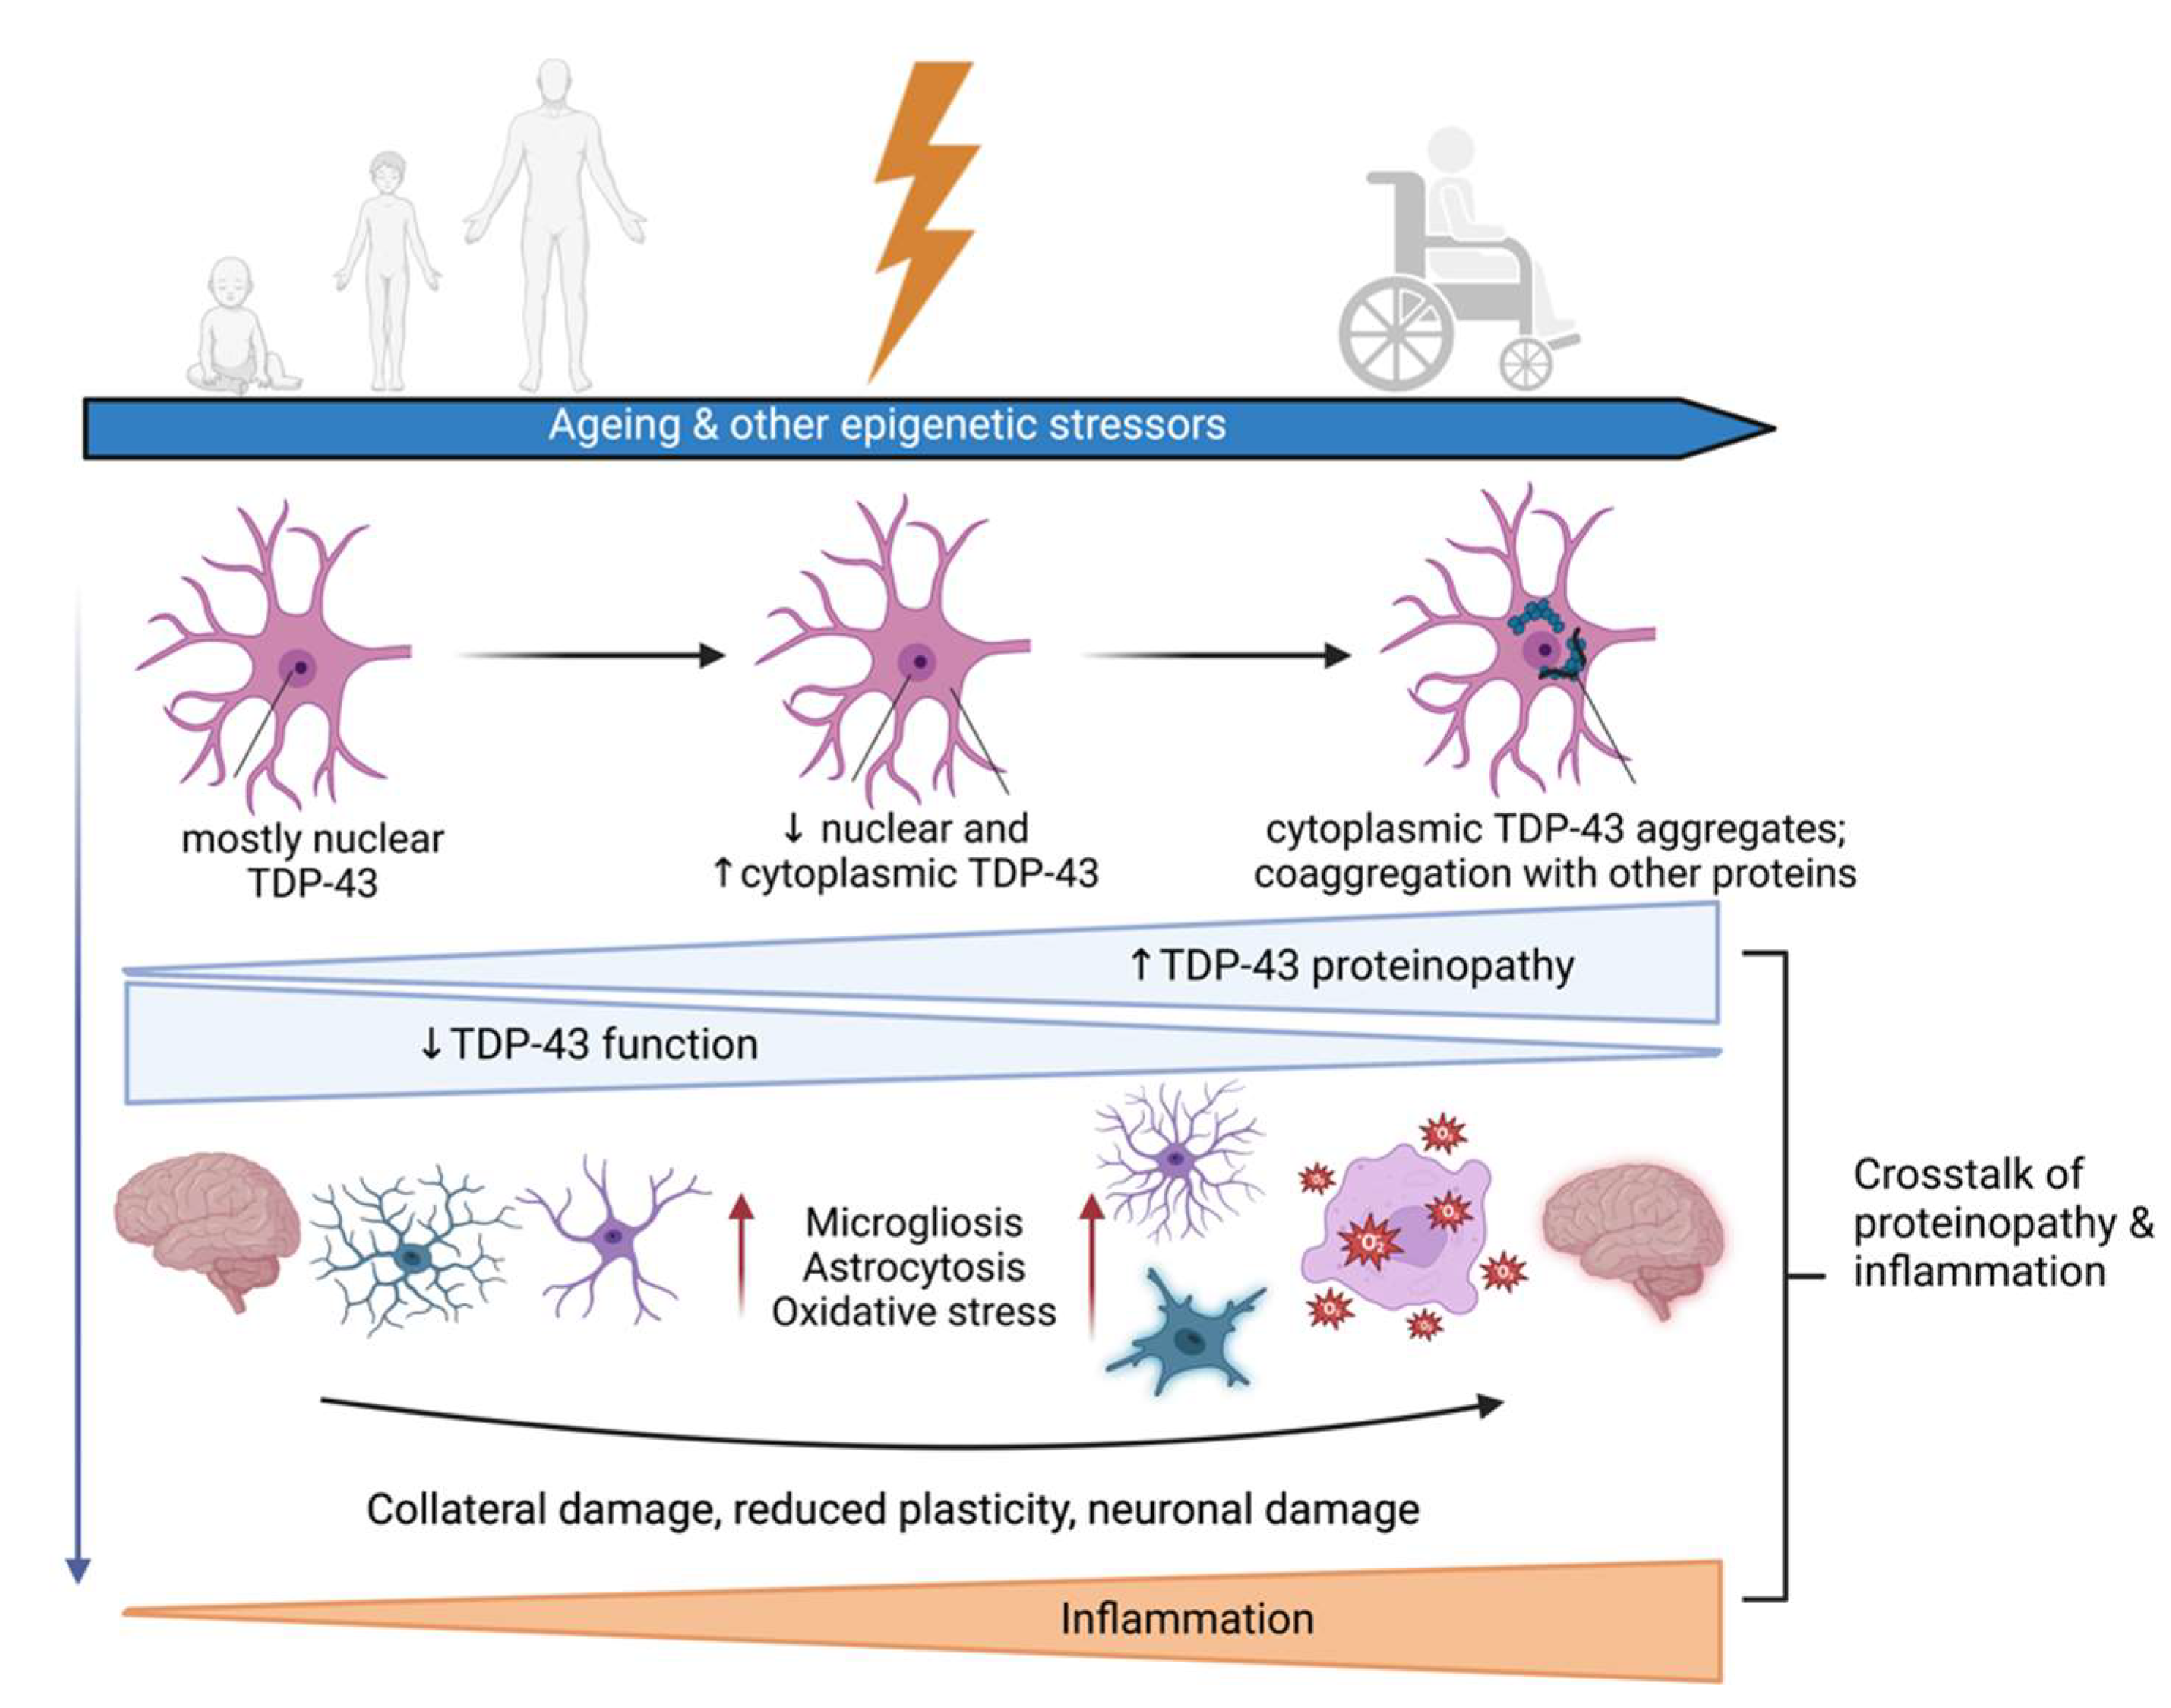 Biomedicines | Free Full-Text | Emerging Trends in the Field of  Inflammation and Proteinopathy in ALS/FTD Spectrum Disorder